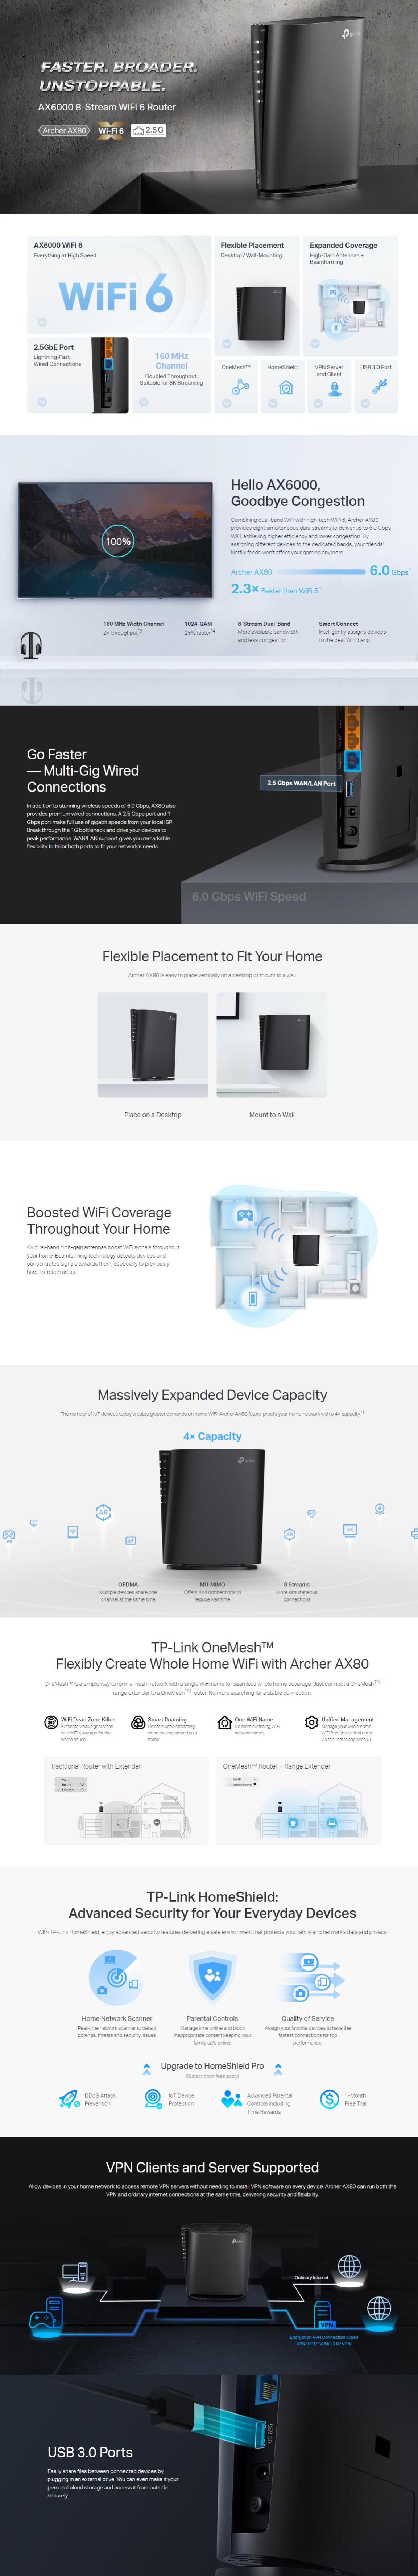 A large marketing image providing additional information about the product TP-Link Archer AX80 - AX6000 8-Stream Wi-Fi 6 Router with 2.5GbE - Additional alt info not provided